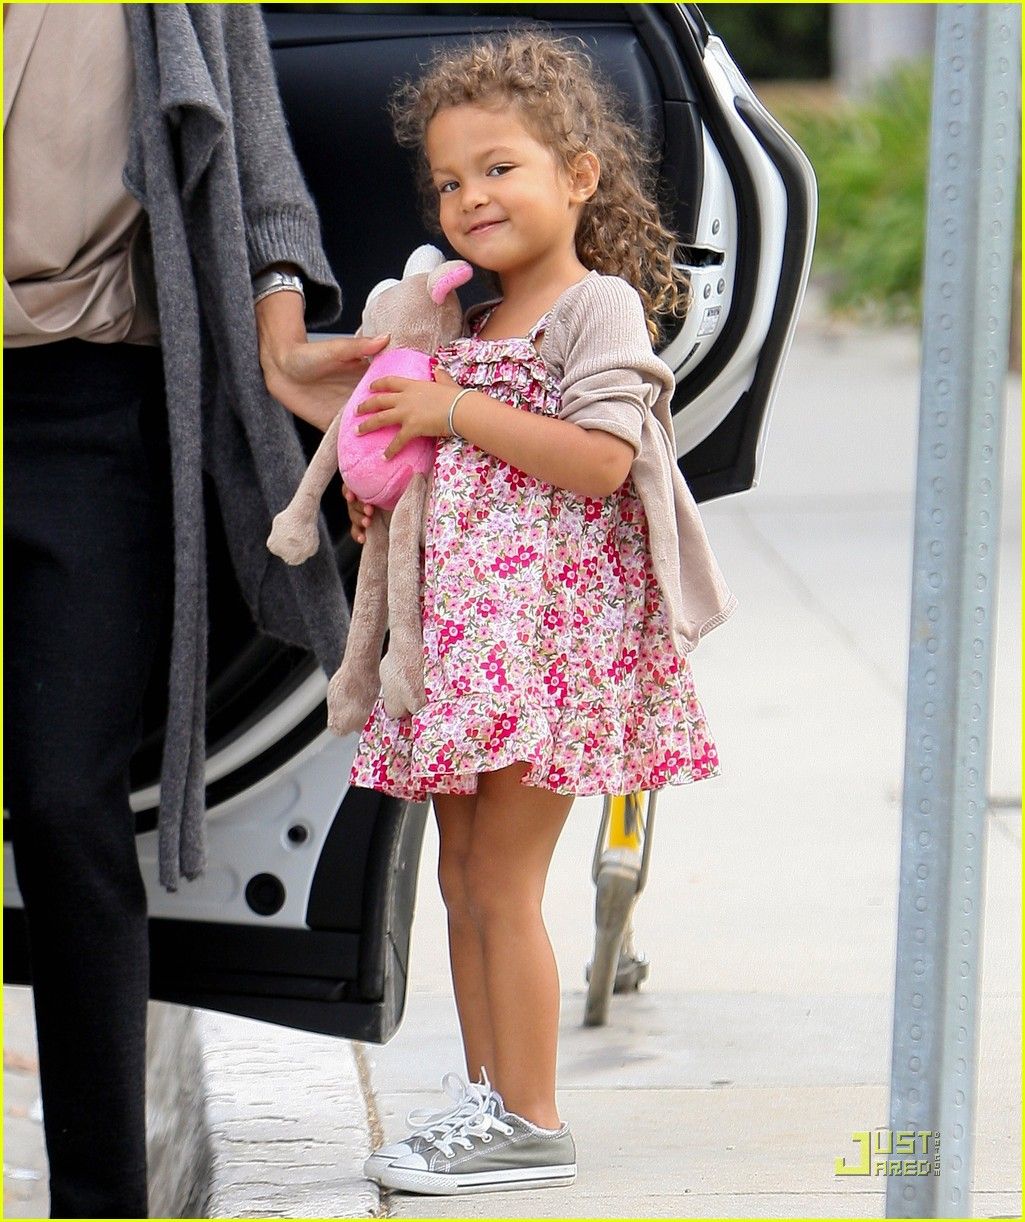  She looks like Halle Berry s kiddo. Both are beautiful girls. Happy Birthday to your big girl!  